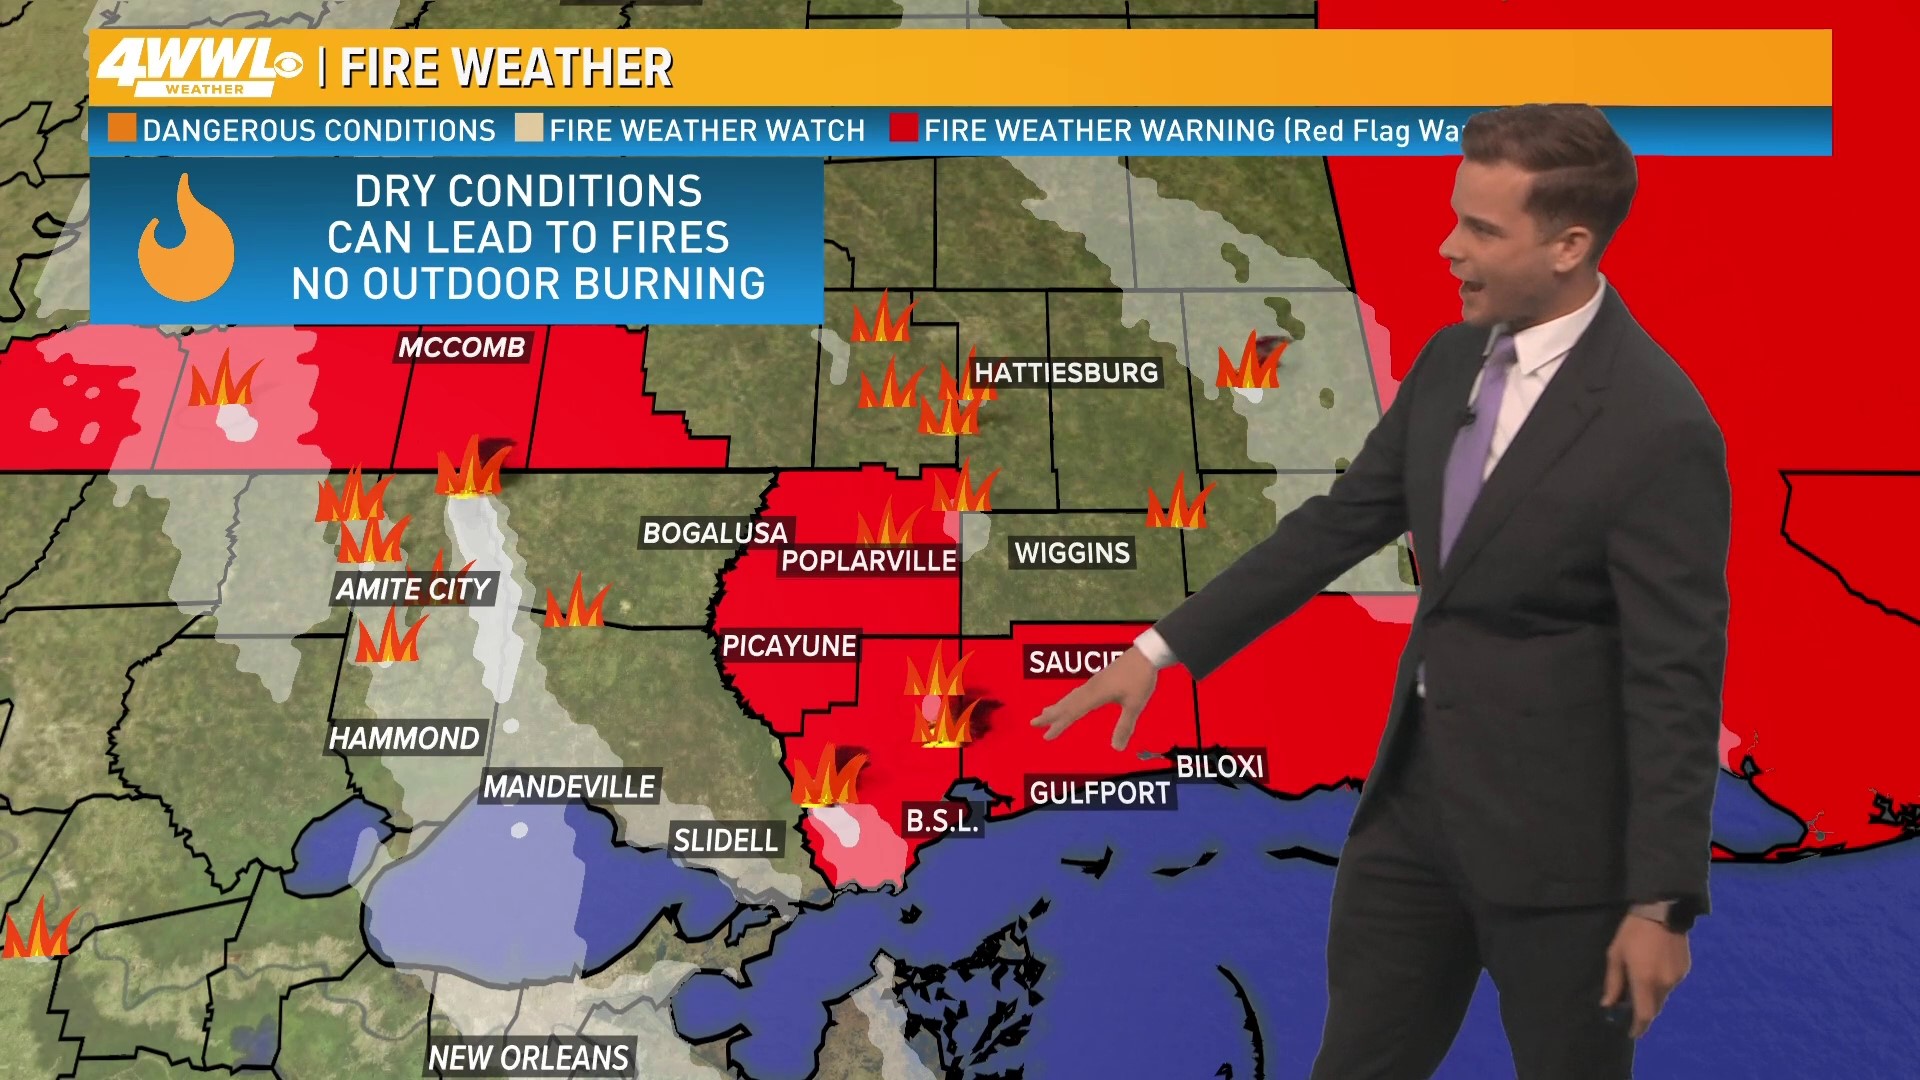 Wildfires in MS impacting air quality for the Gulf Coast